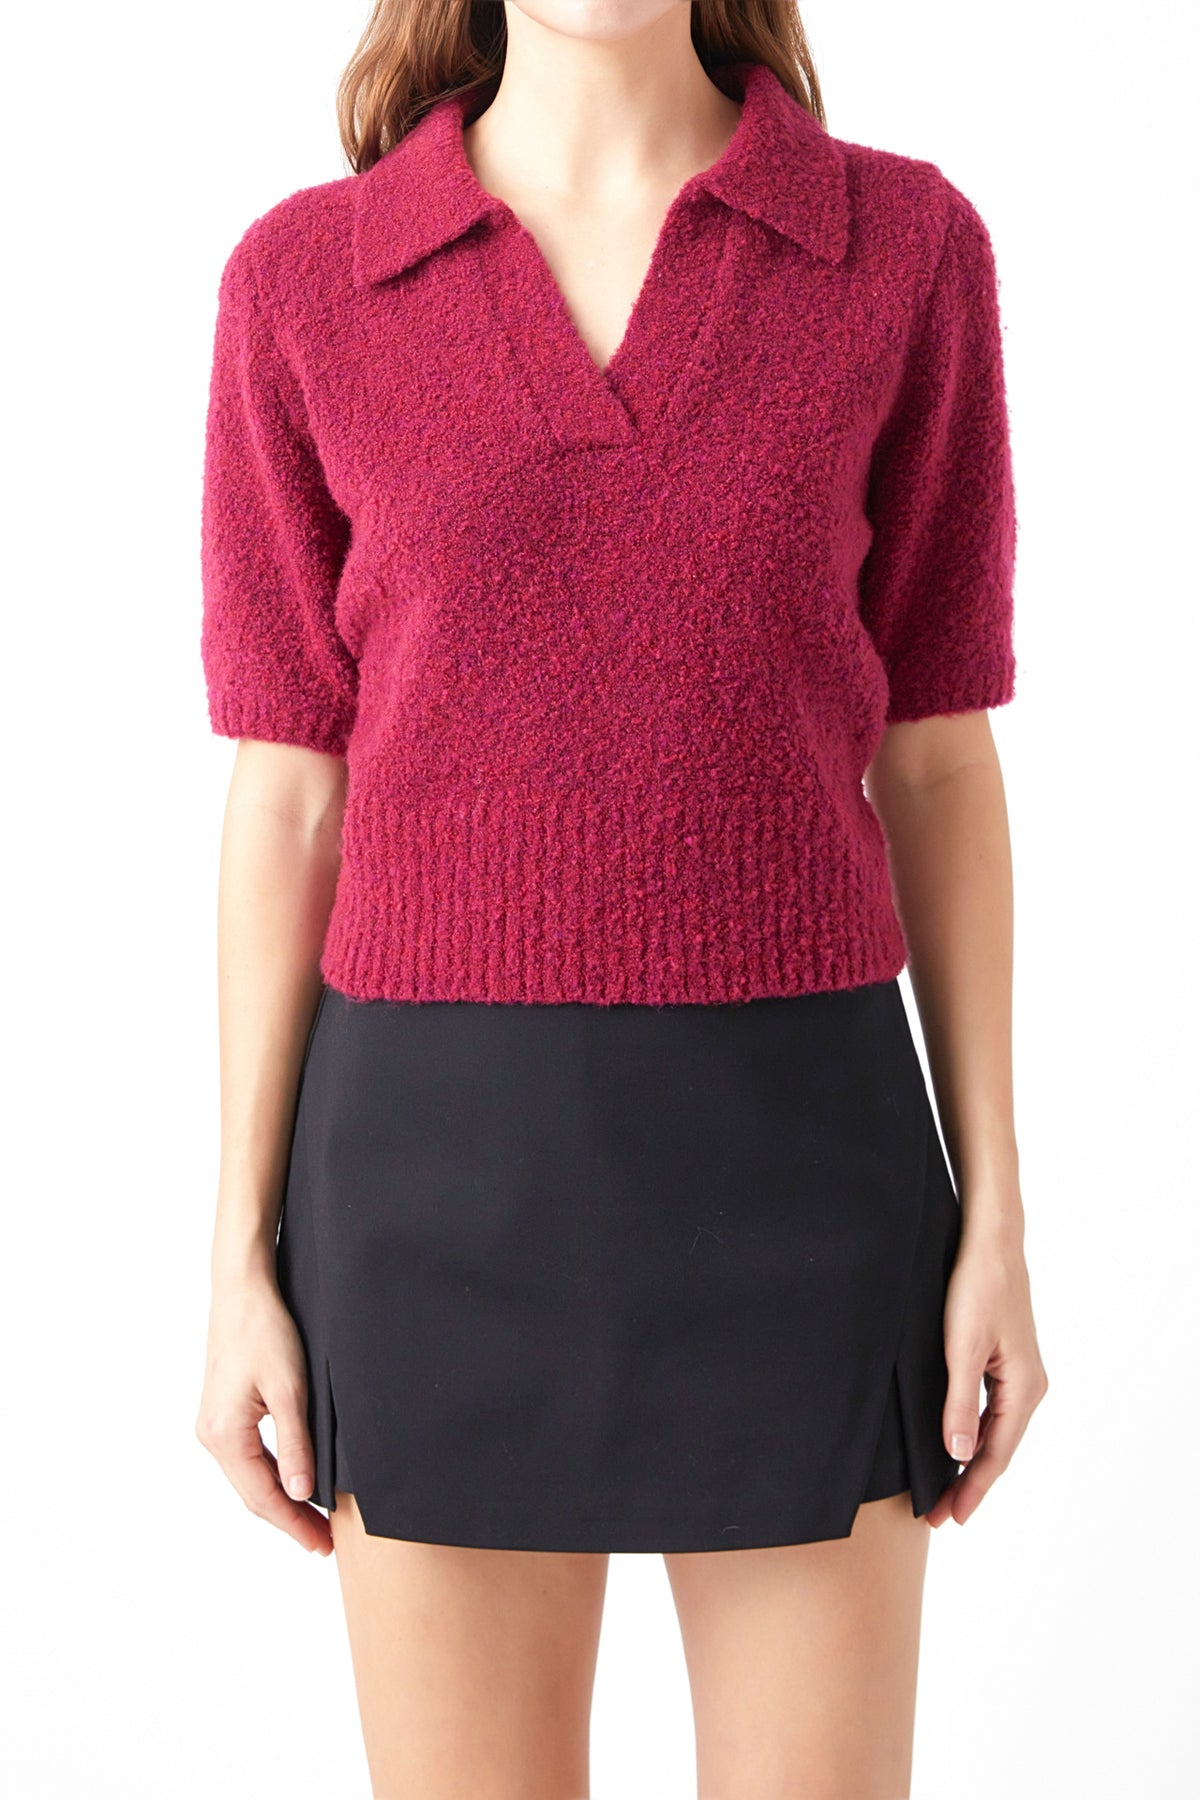 ENDLESS ROSE - Short-Sleeve Collared Sweater - SWEATERS & KNITS available at Objectrare